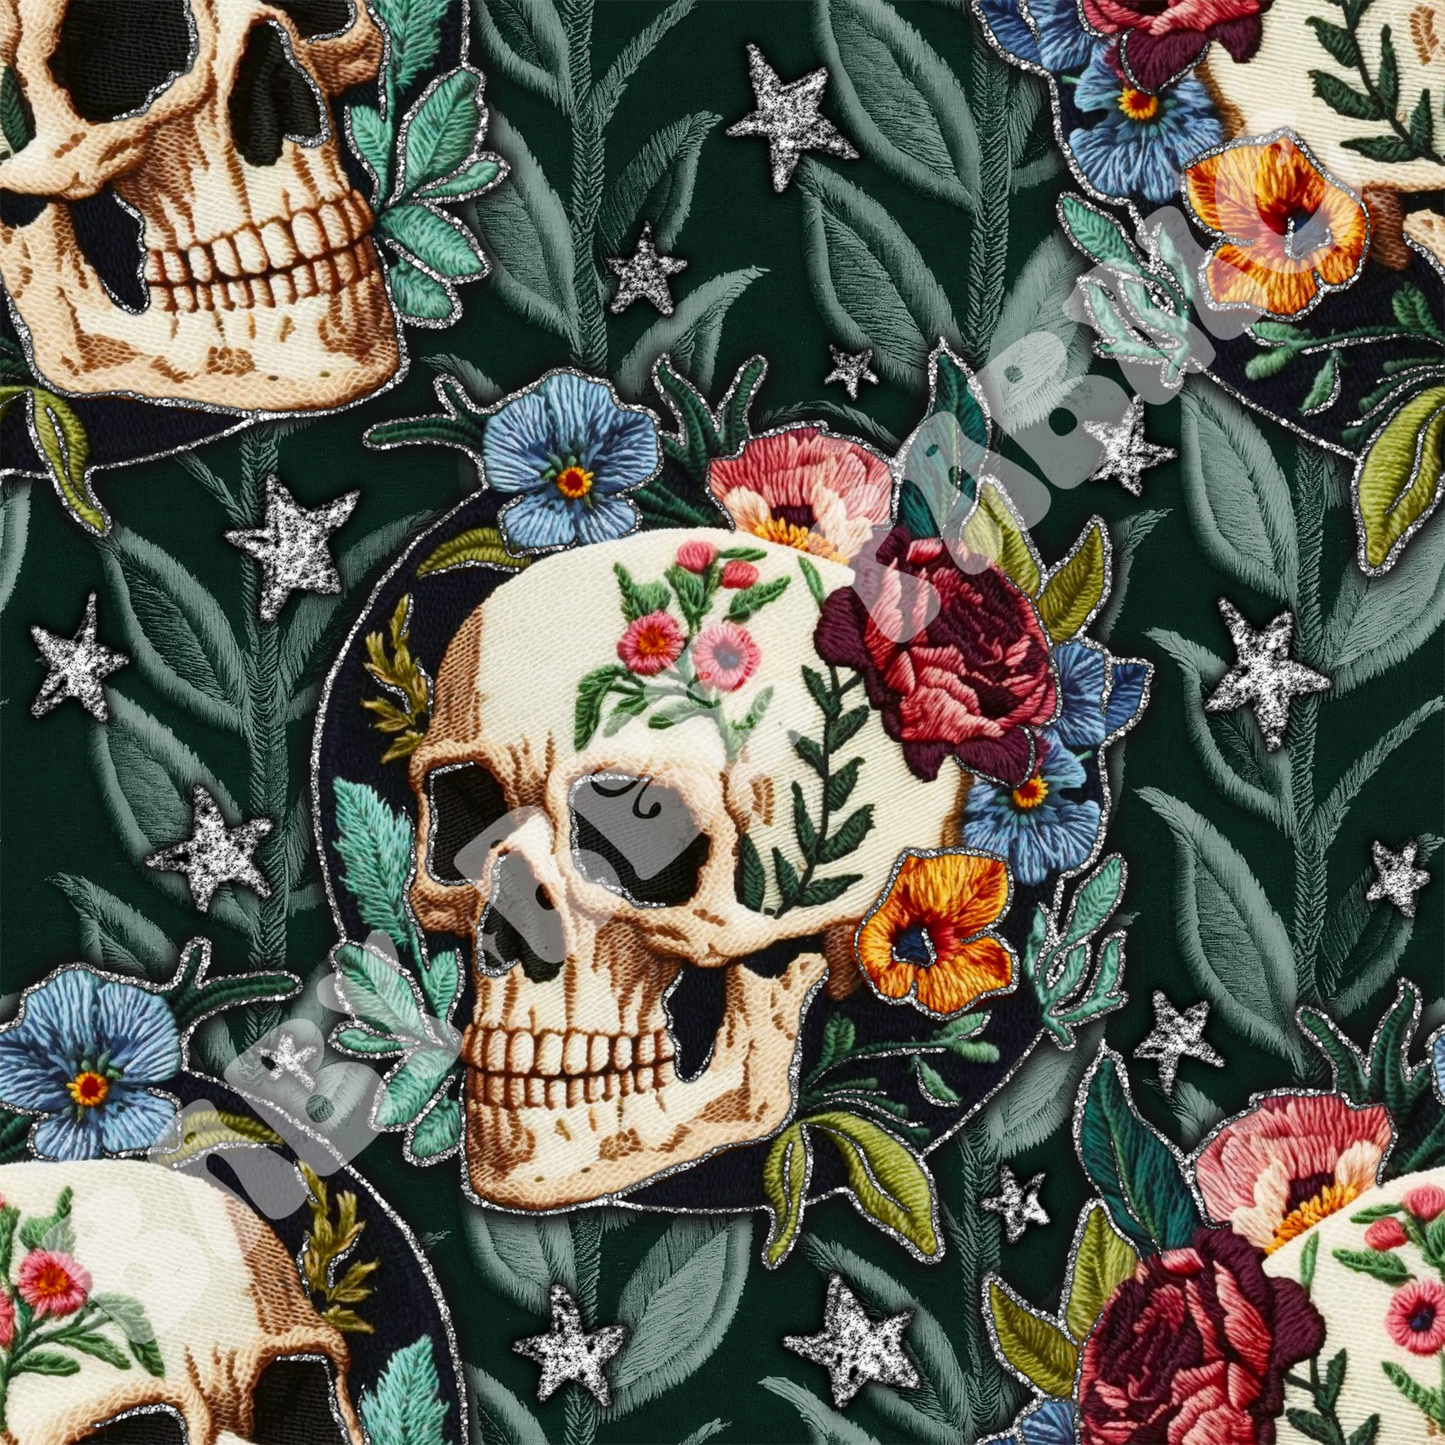 Skull Floral Embroidery